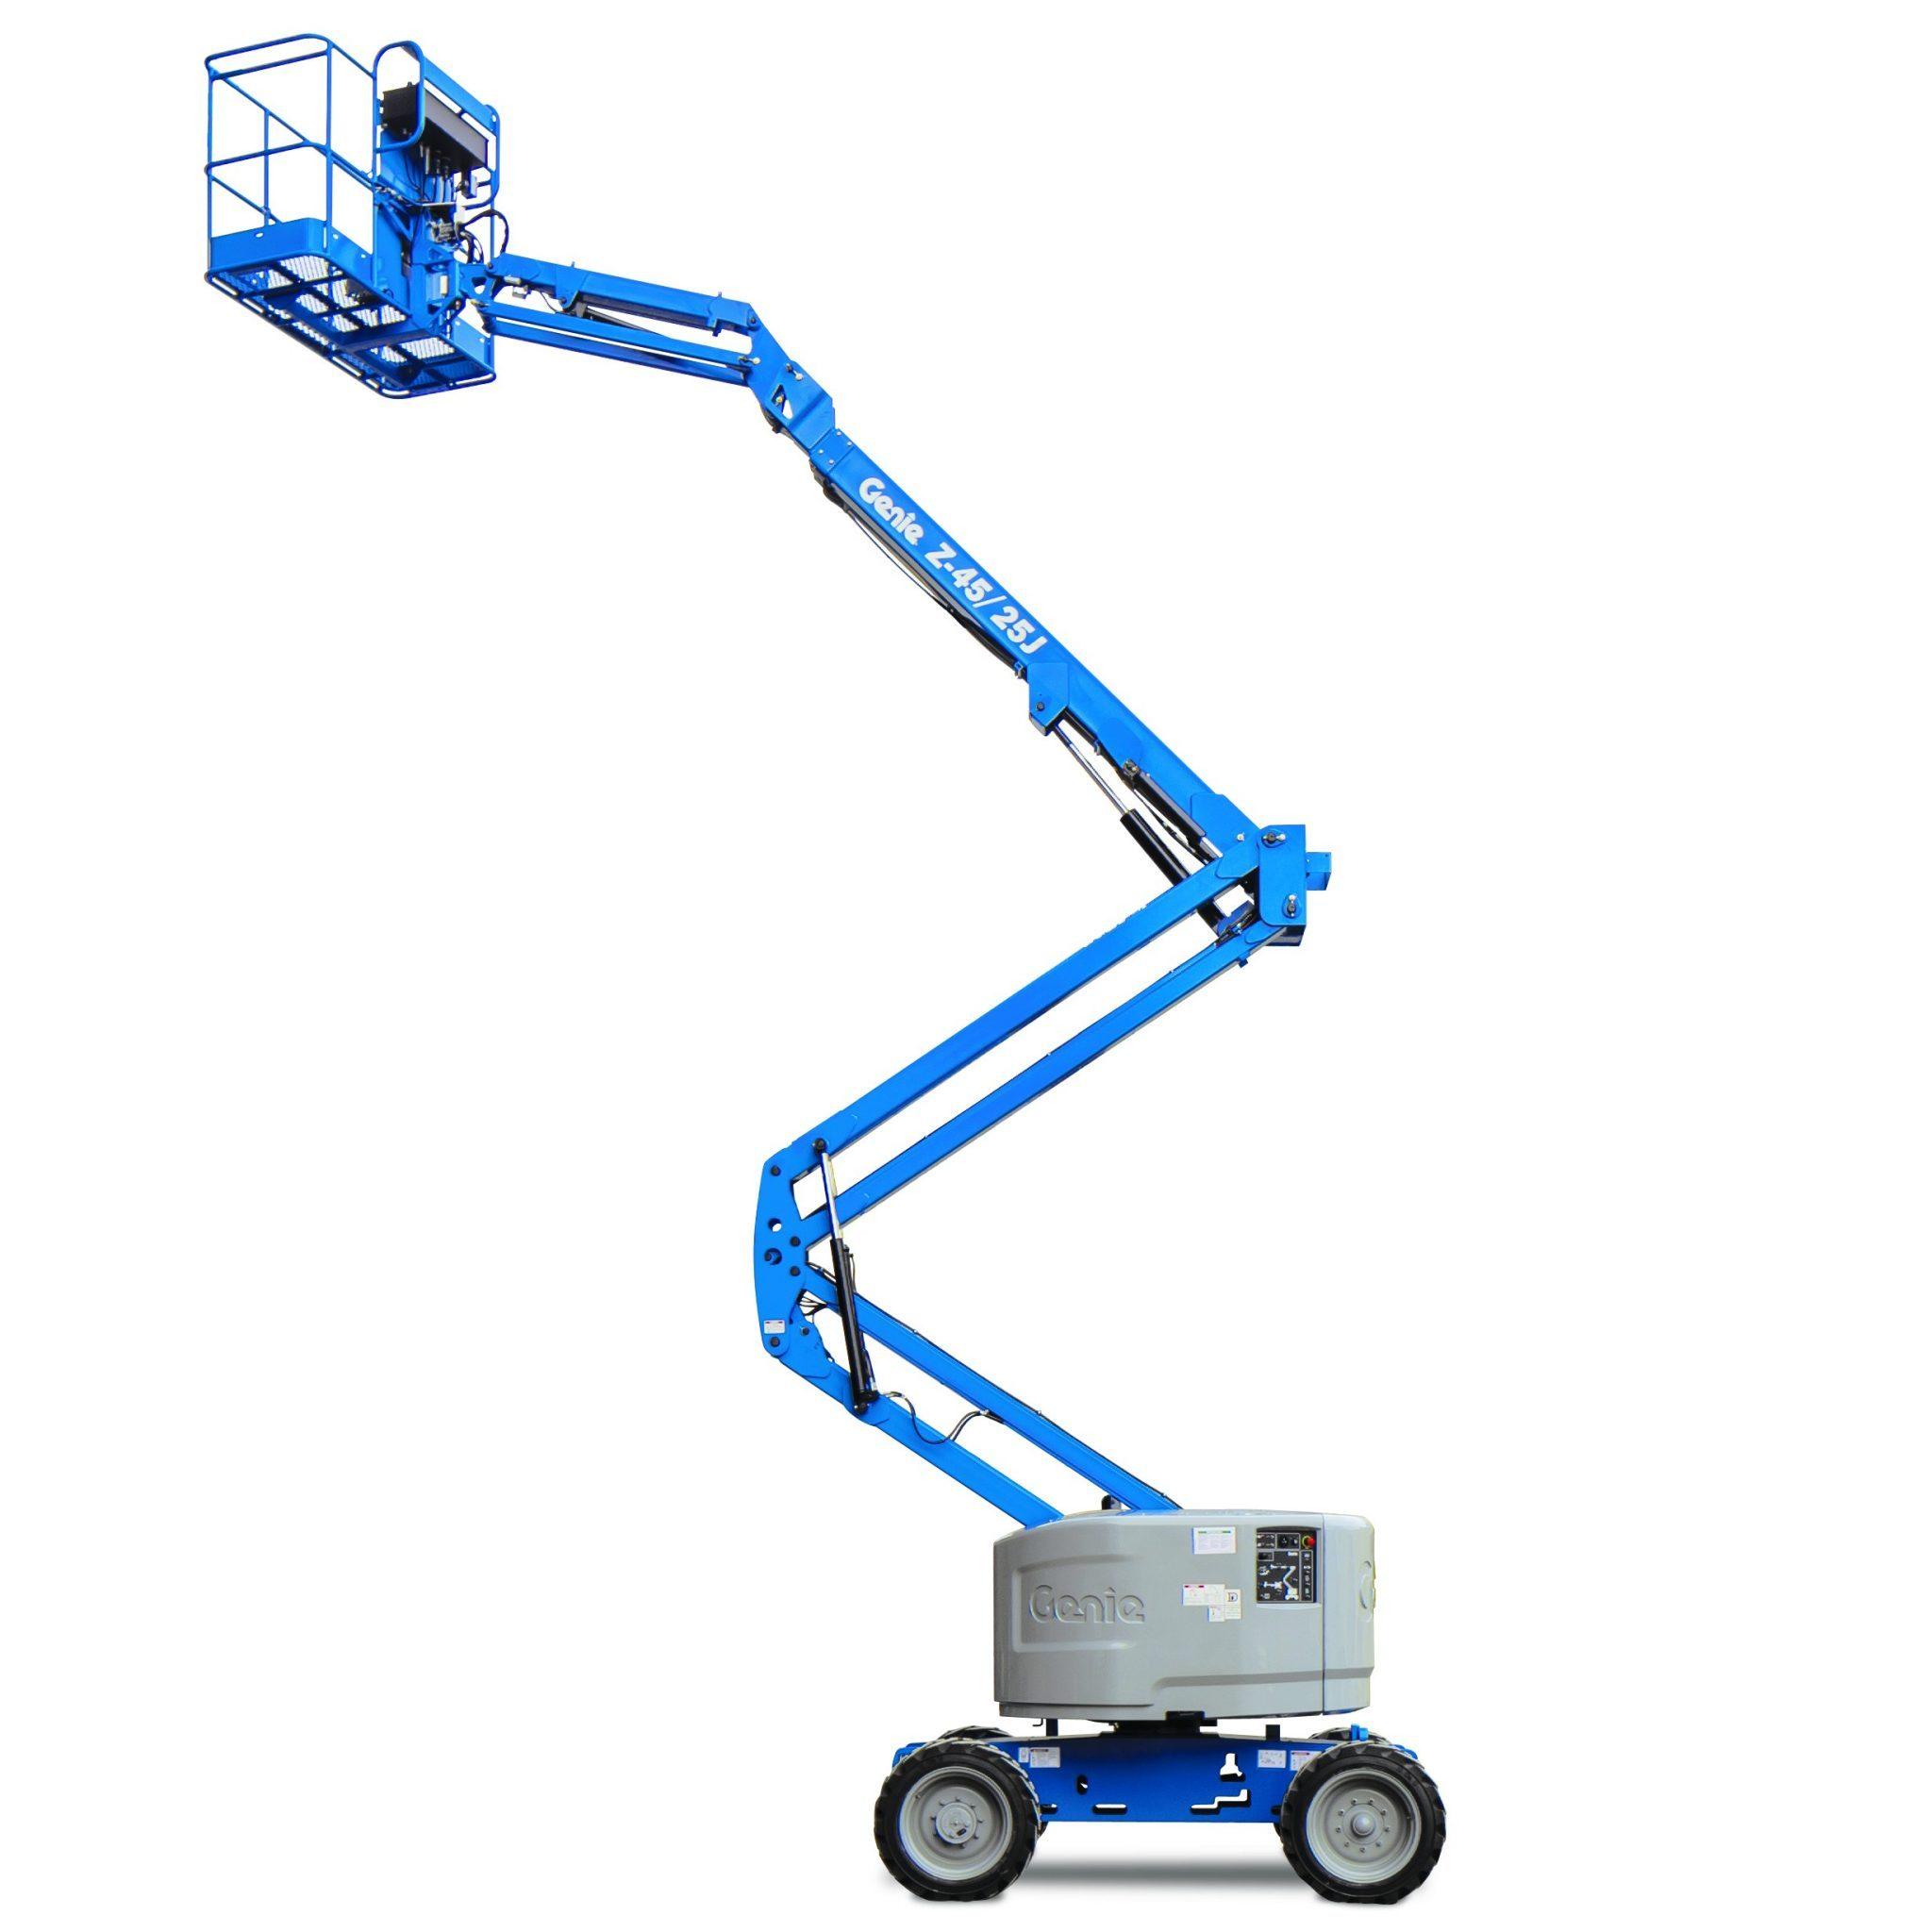 ad genie 6 meter articulating electric boom lift – z4